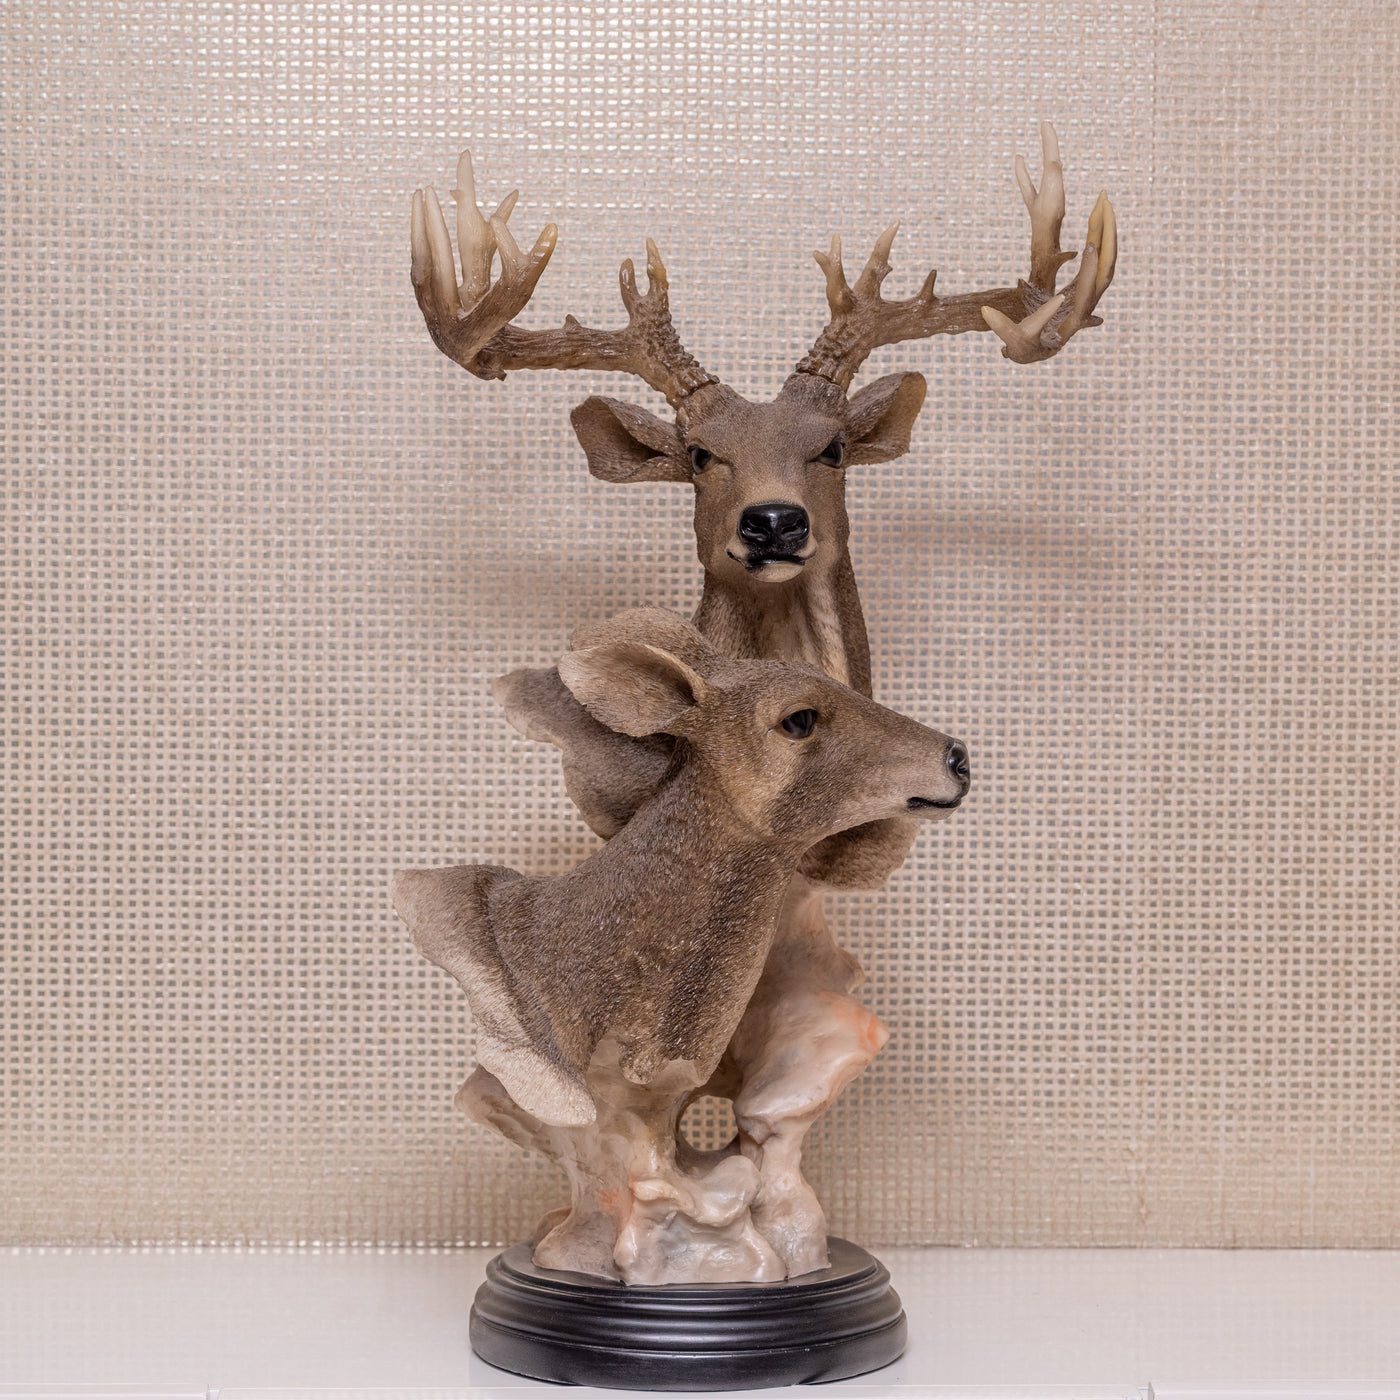 Decorative deer statues by Home 360